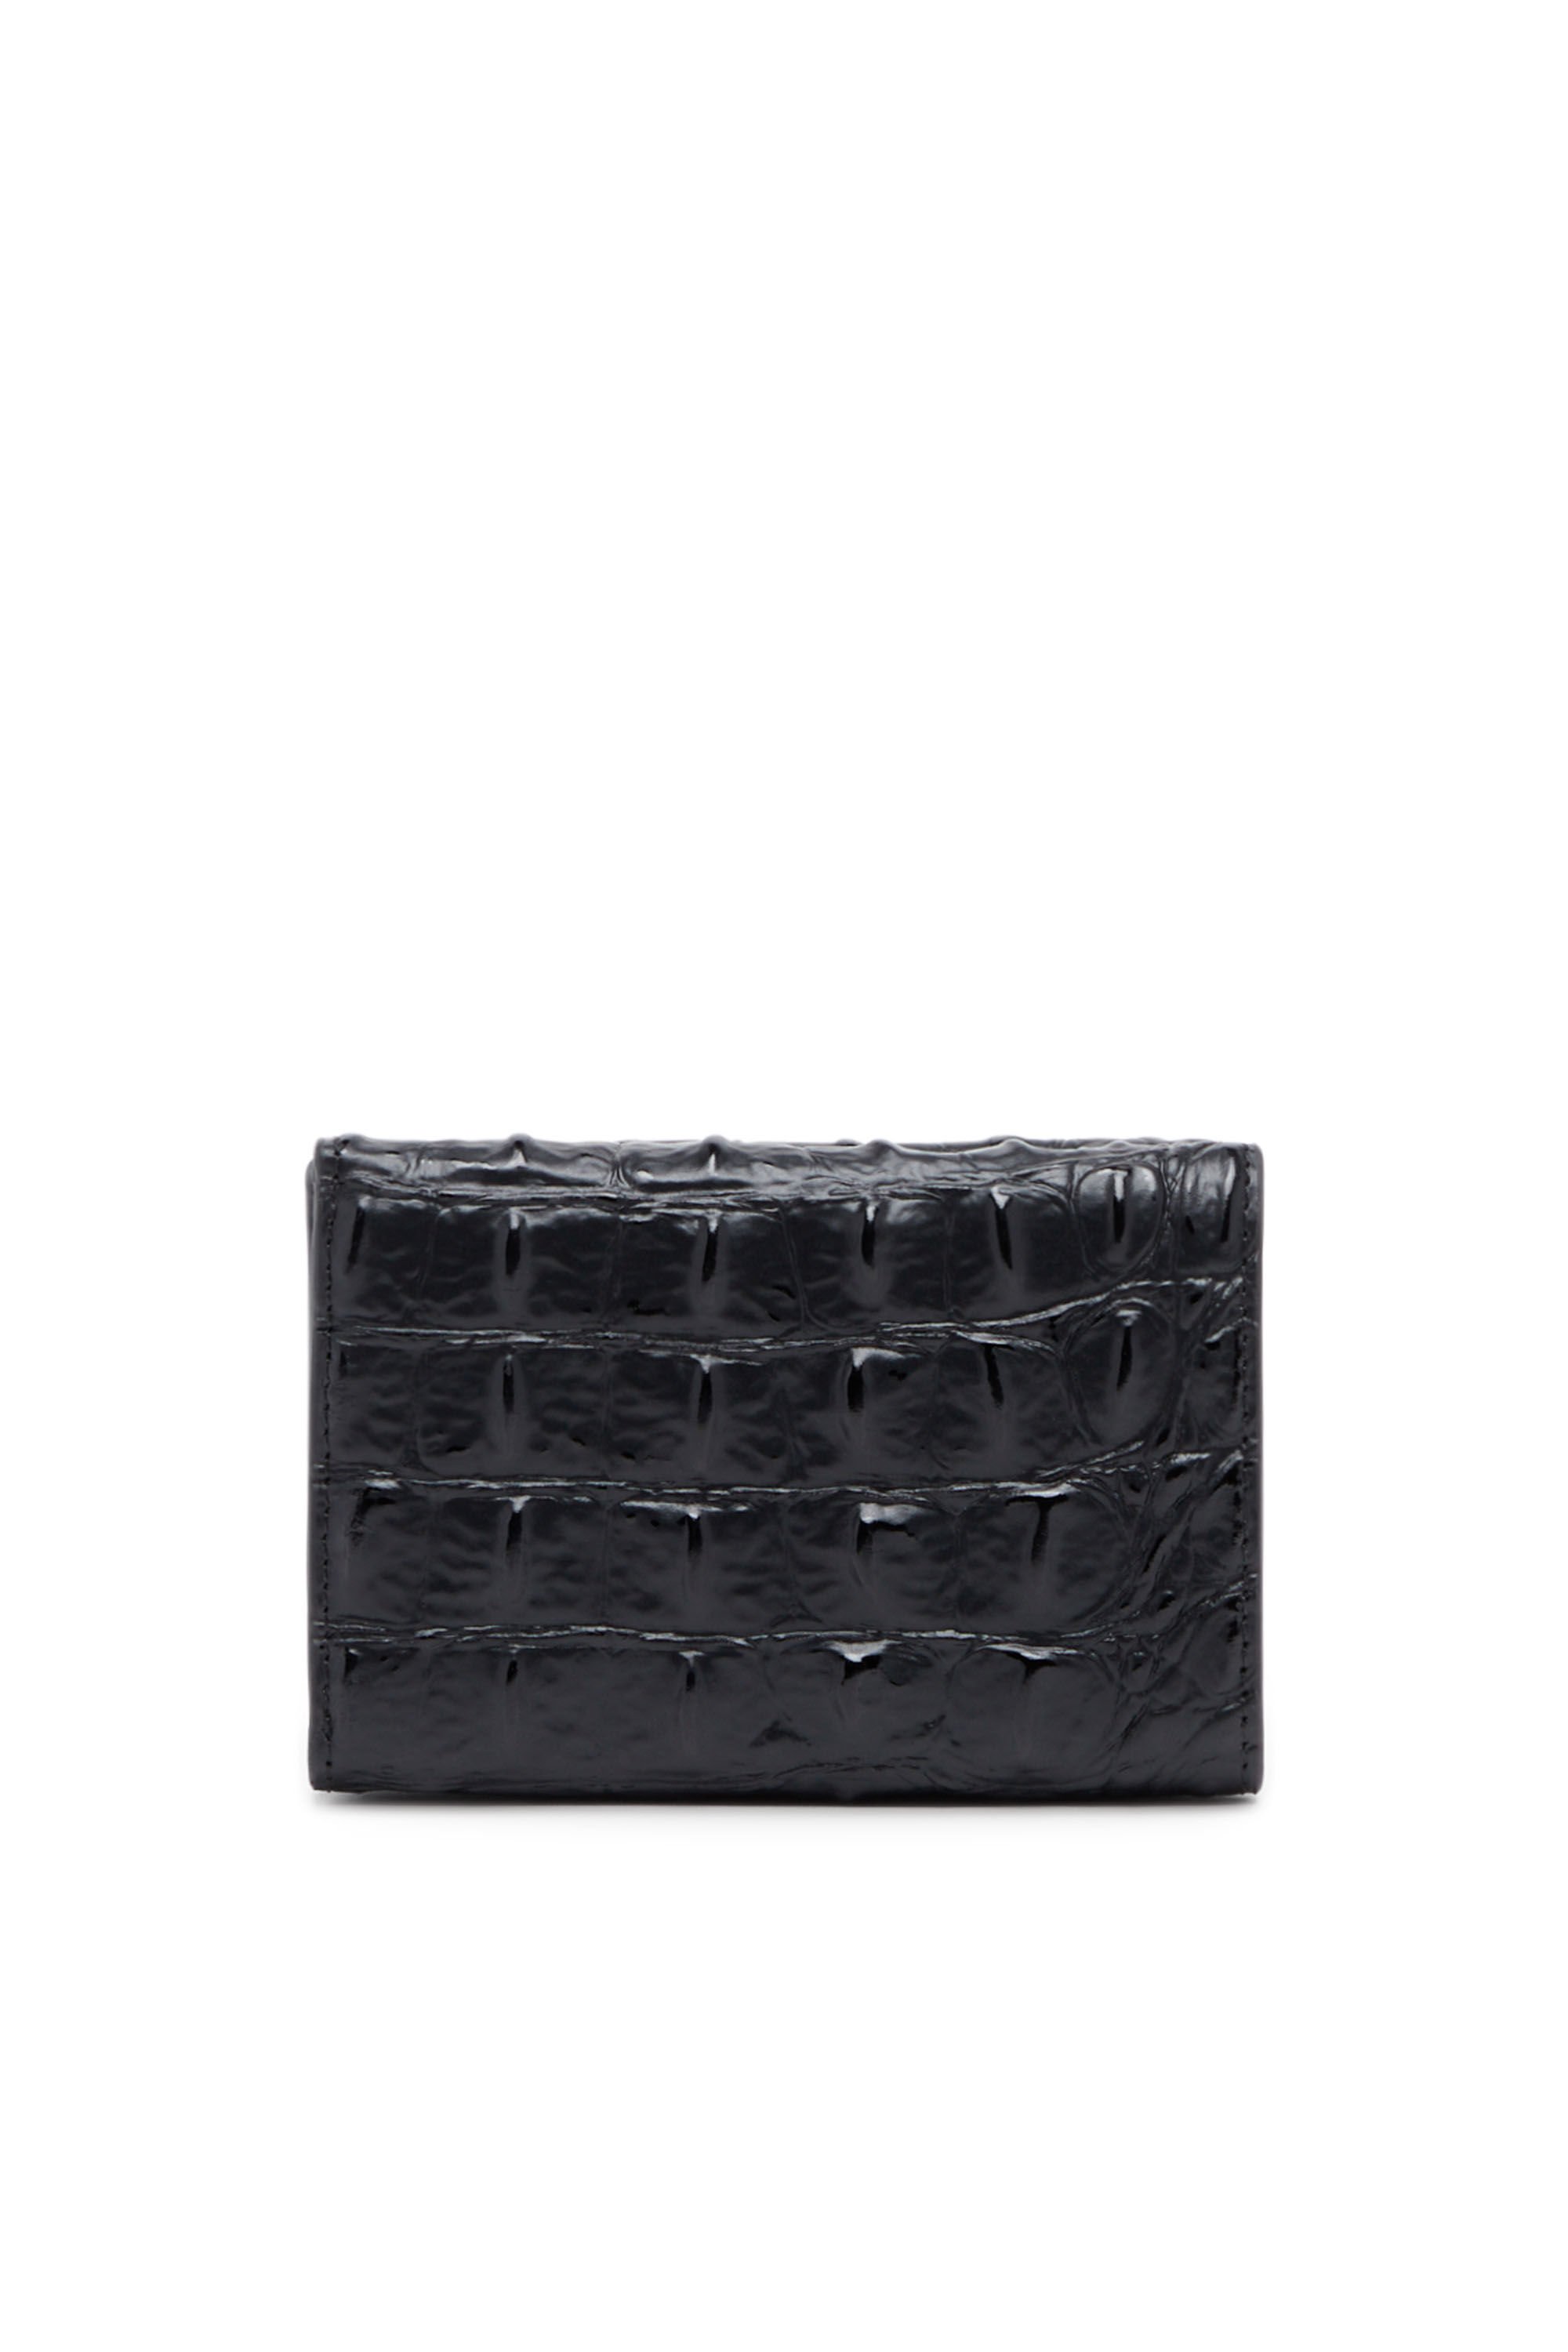 Diesel - TRI-FOLD COIN S, Man Tri-fold wallet in croc-effect leather in Black - Image 2